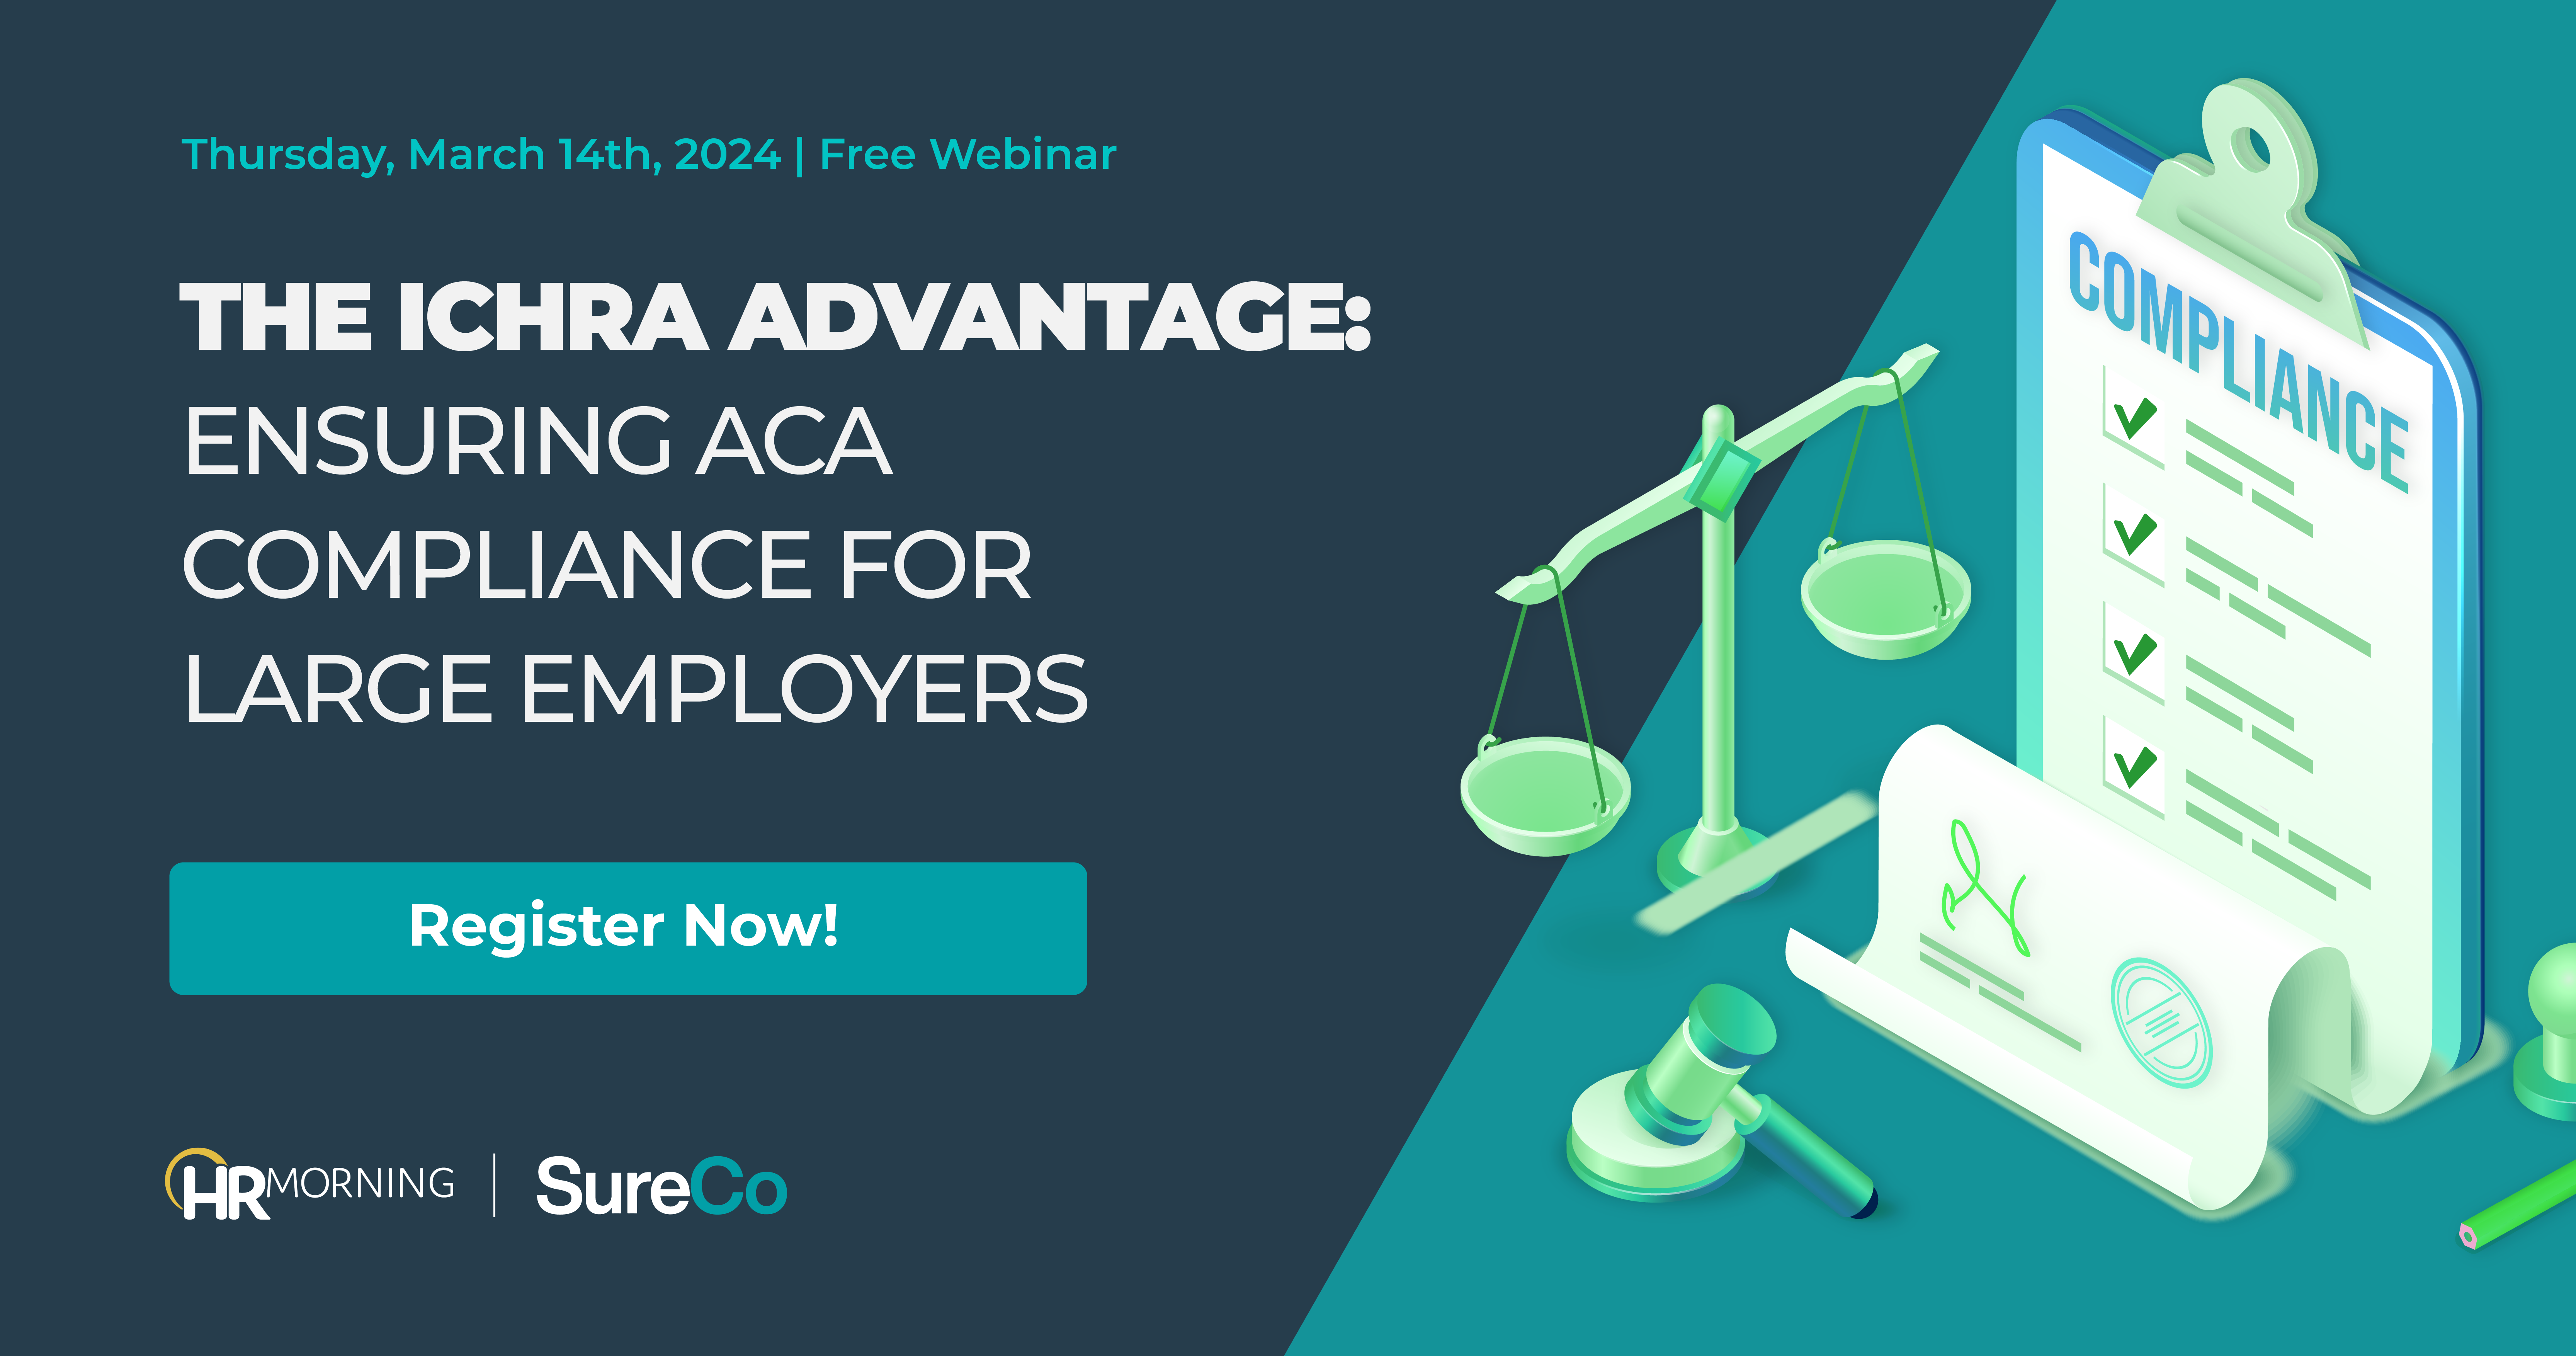 The ICHRA Advantage: Ensuring ACA Compliance for Large Employers